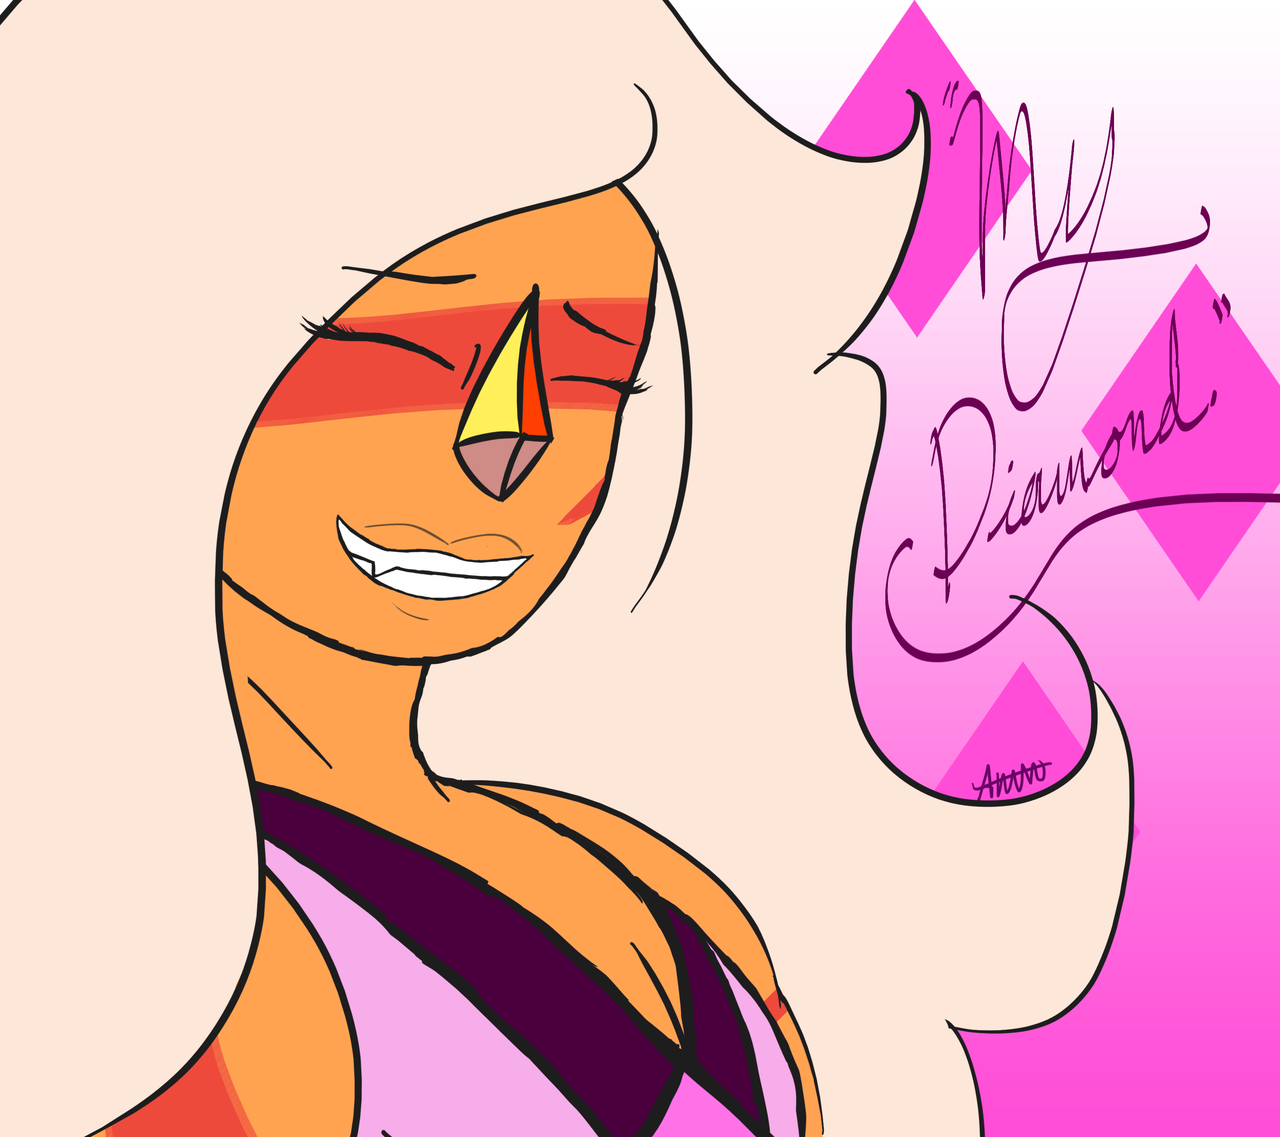 A personal fan piece I made a while ago before we saw Pink. I want to see more Jasper-Pink history now!